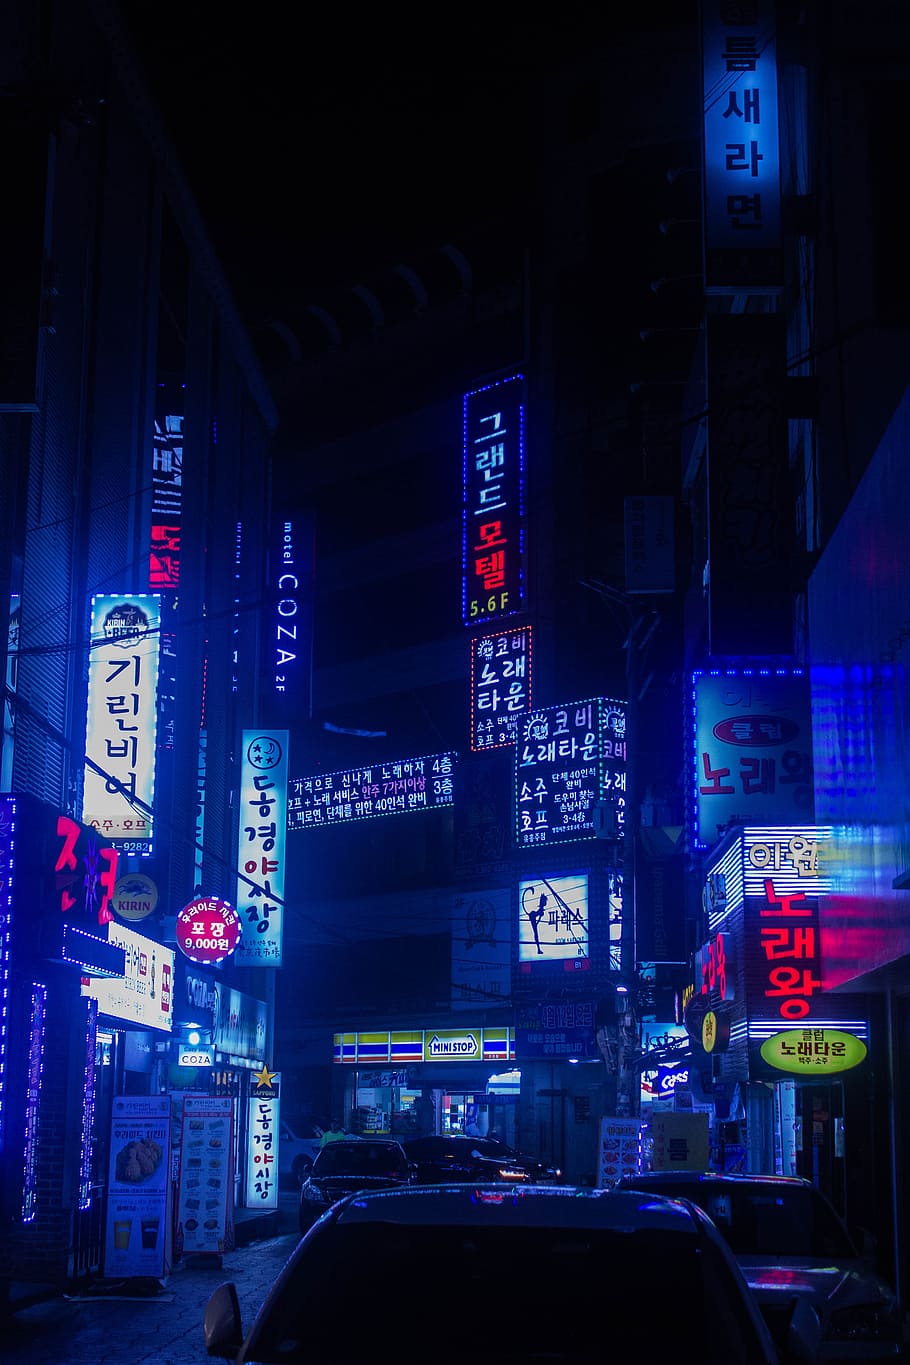 HD Wallpaper: Building Signage Turned On During Nighttime, Korea, Neon, Blue Neon